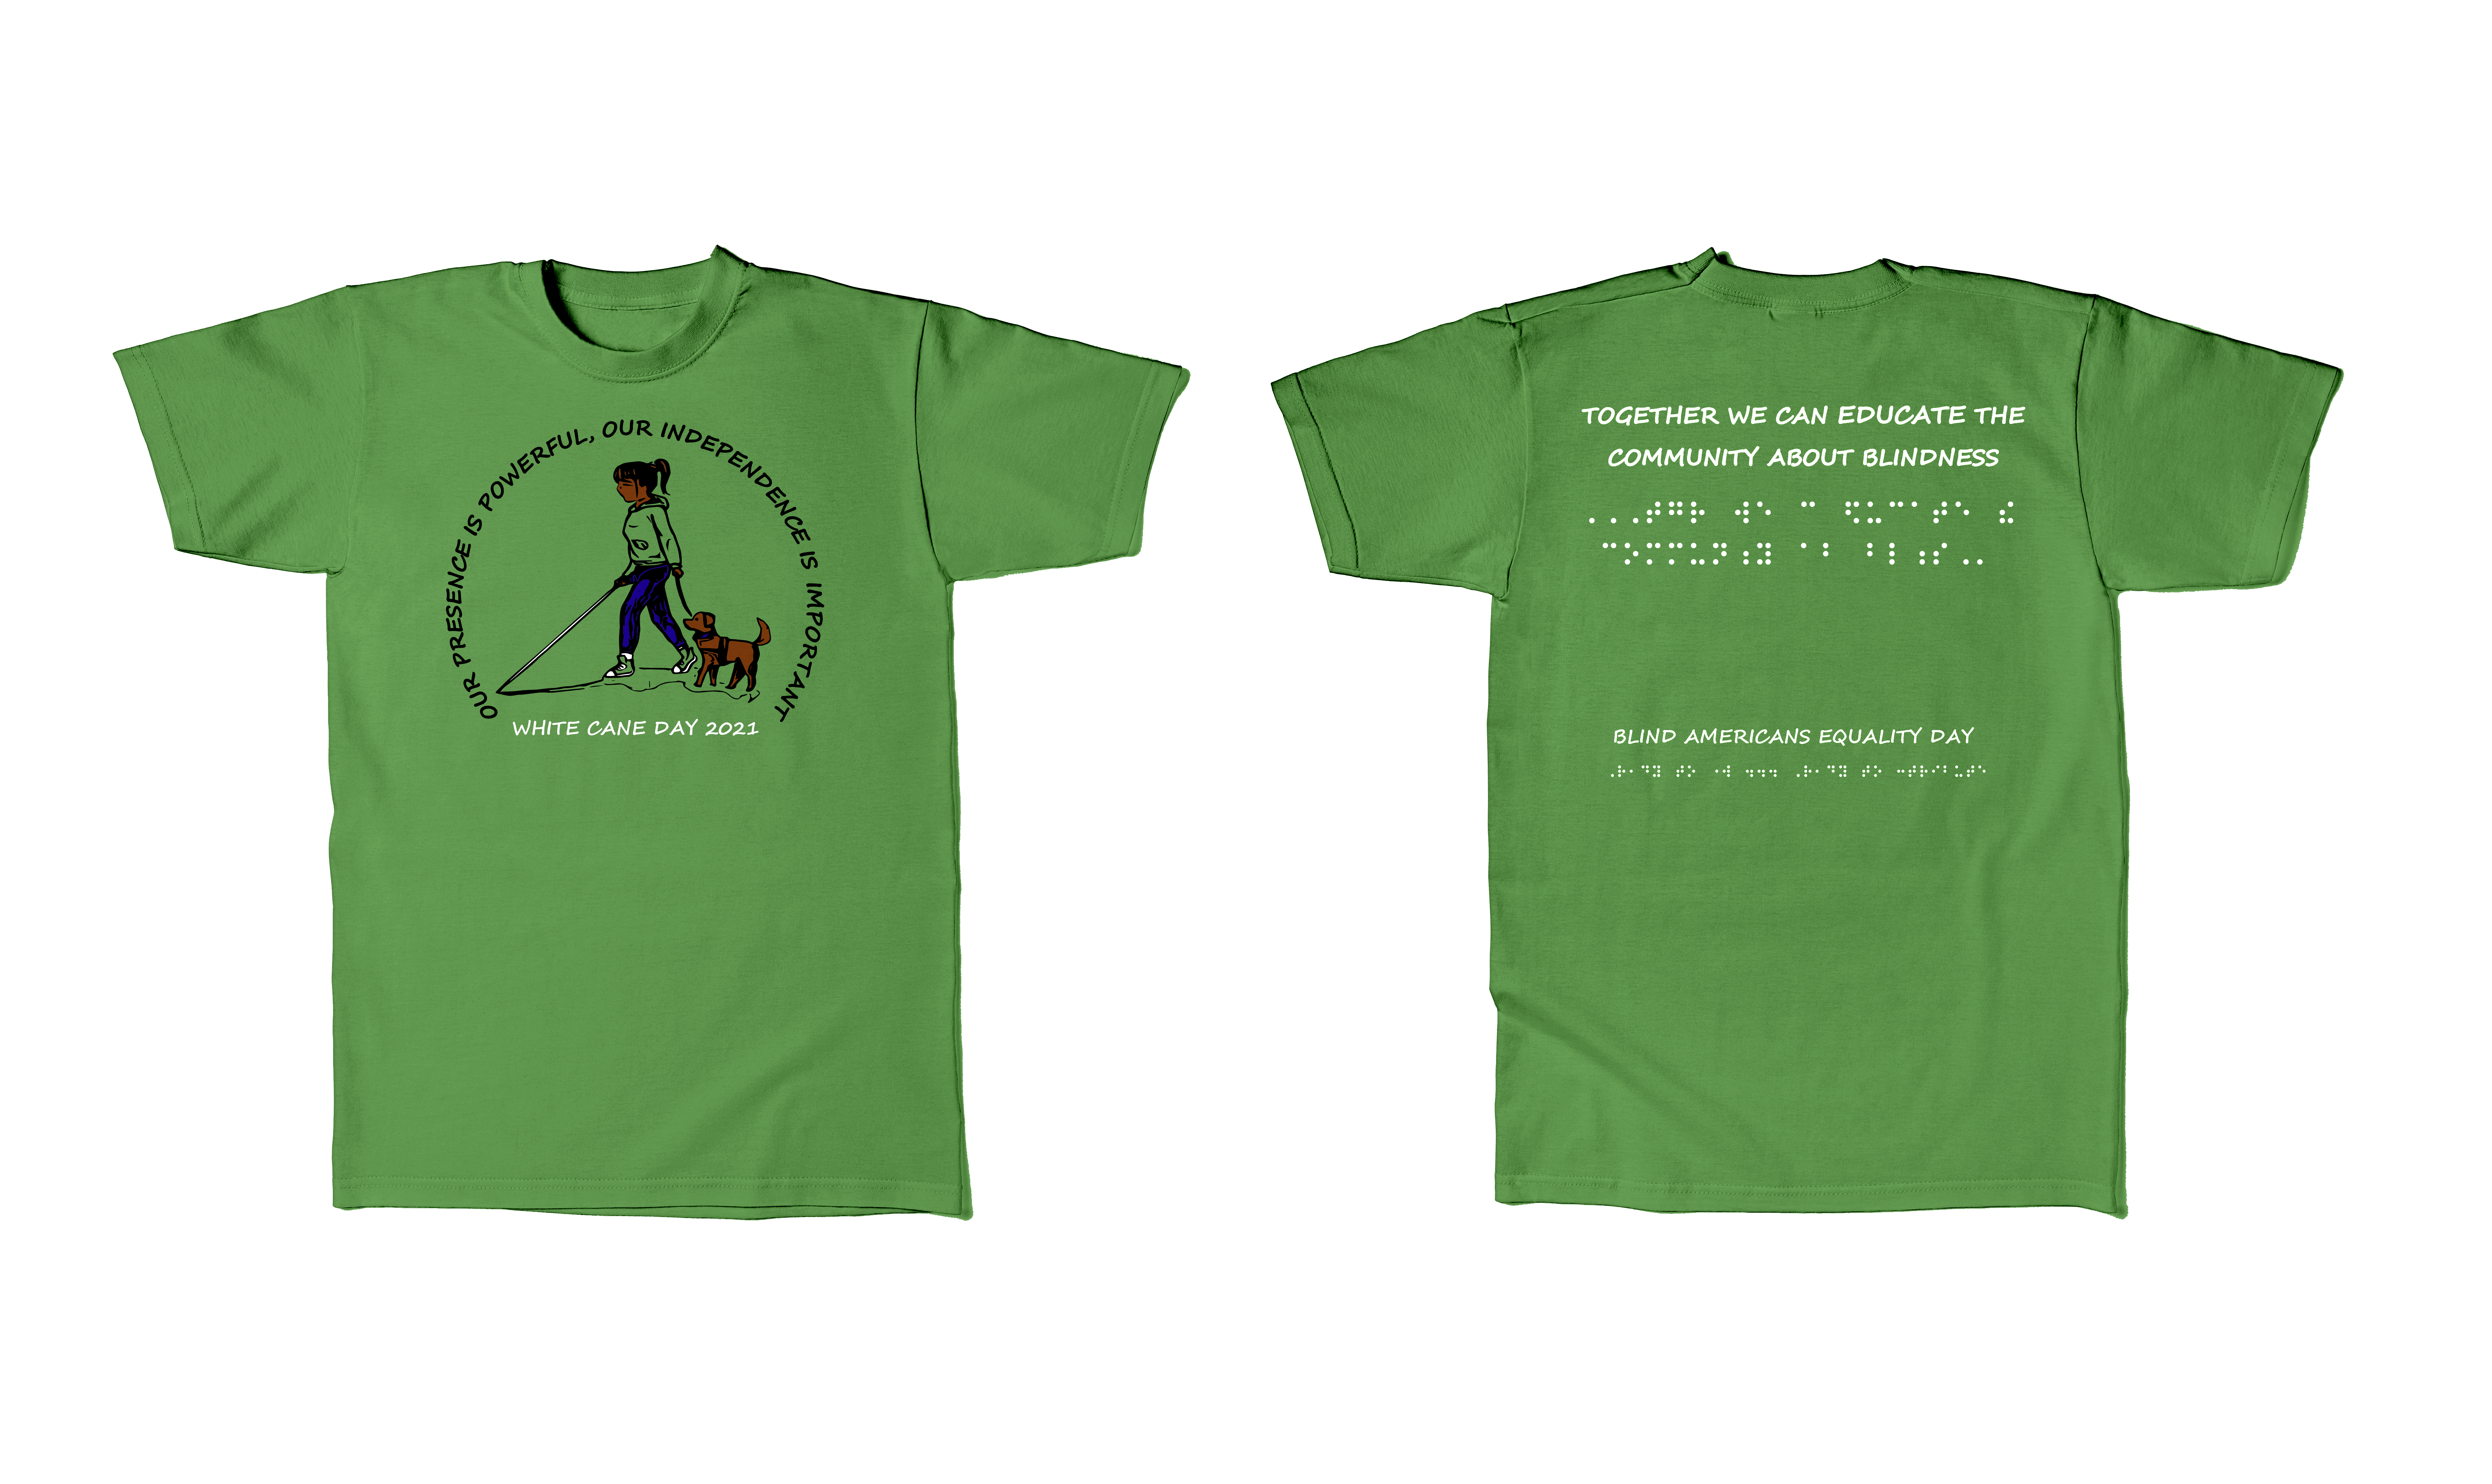 2021: Kelly green shirt, with black, white, brown, and blue ink FRONT: On top, making a half circle in black ink the phrase OUR PRESENCE IS POWERFUL, OUR INDEPENDENCE IS IMPORTANT, below is a drawn image of a girl with a ponytail wearing a green hoodie, blue jeans and green sneakers using a cane holding the leash of a brown guide dog. A shadow of the girl and dog is on the ground.  Below the shadow in white ink is WHITE CANE DAY 2021 BACK: starting from the top down the phrase in print TOGETHER WE CAN EDUCATE THE COMMUNITY ABOUT BLINDNESS, below the same phrase in Braille. Towards the bottom of the shirt in print BLIND AMERICANS EQUALITY DAY, at the bottom in Braille the phrase Ready to work…Ready to contribute